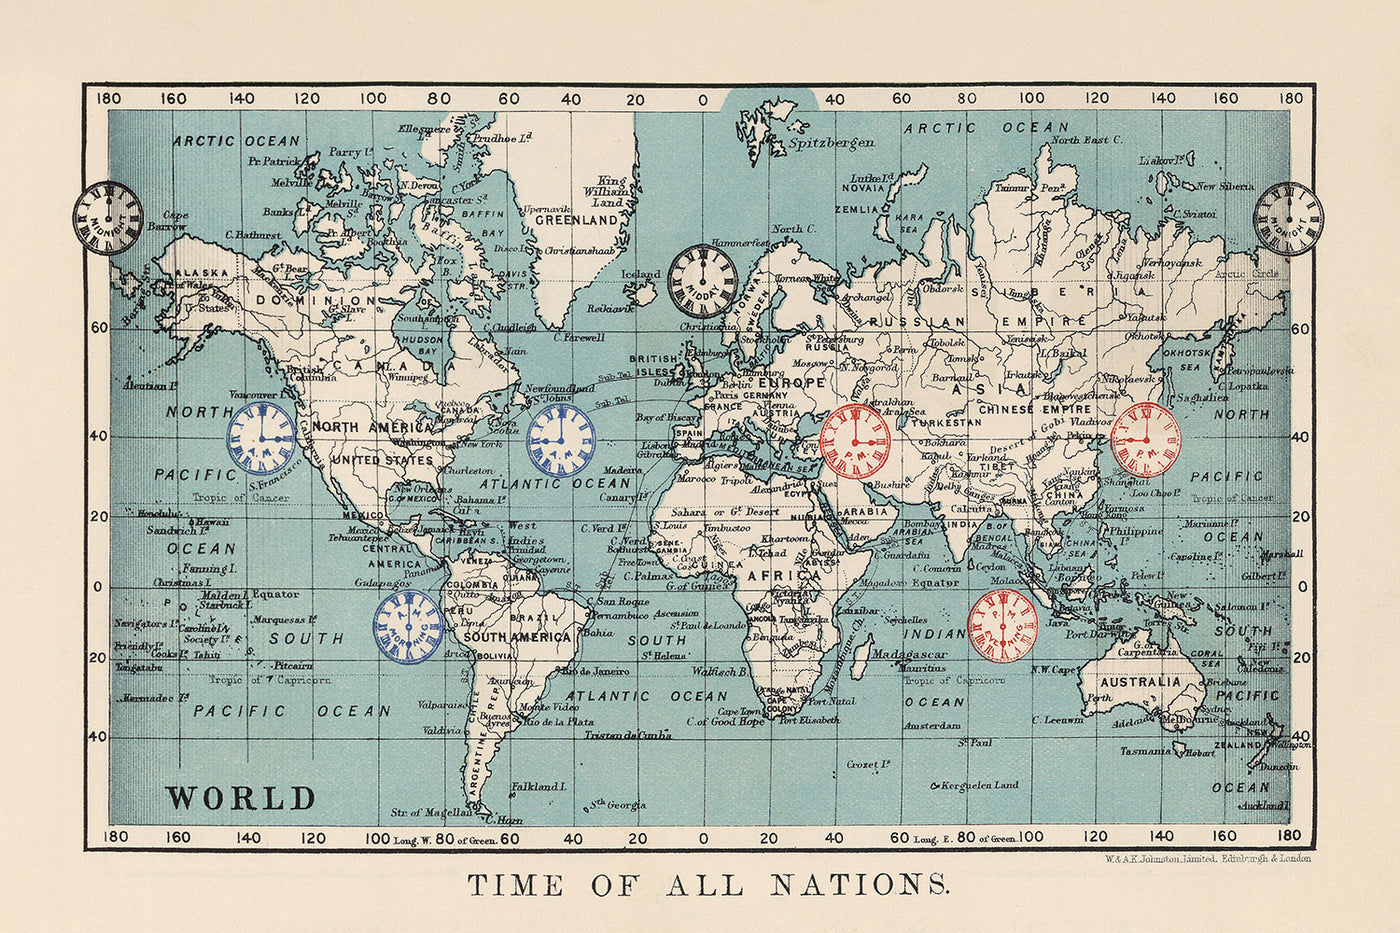 Old Time Zones World Map by AK Johnston, 1906